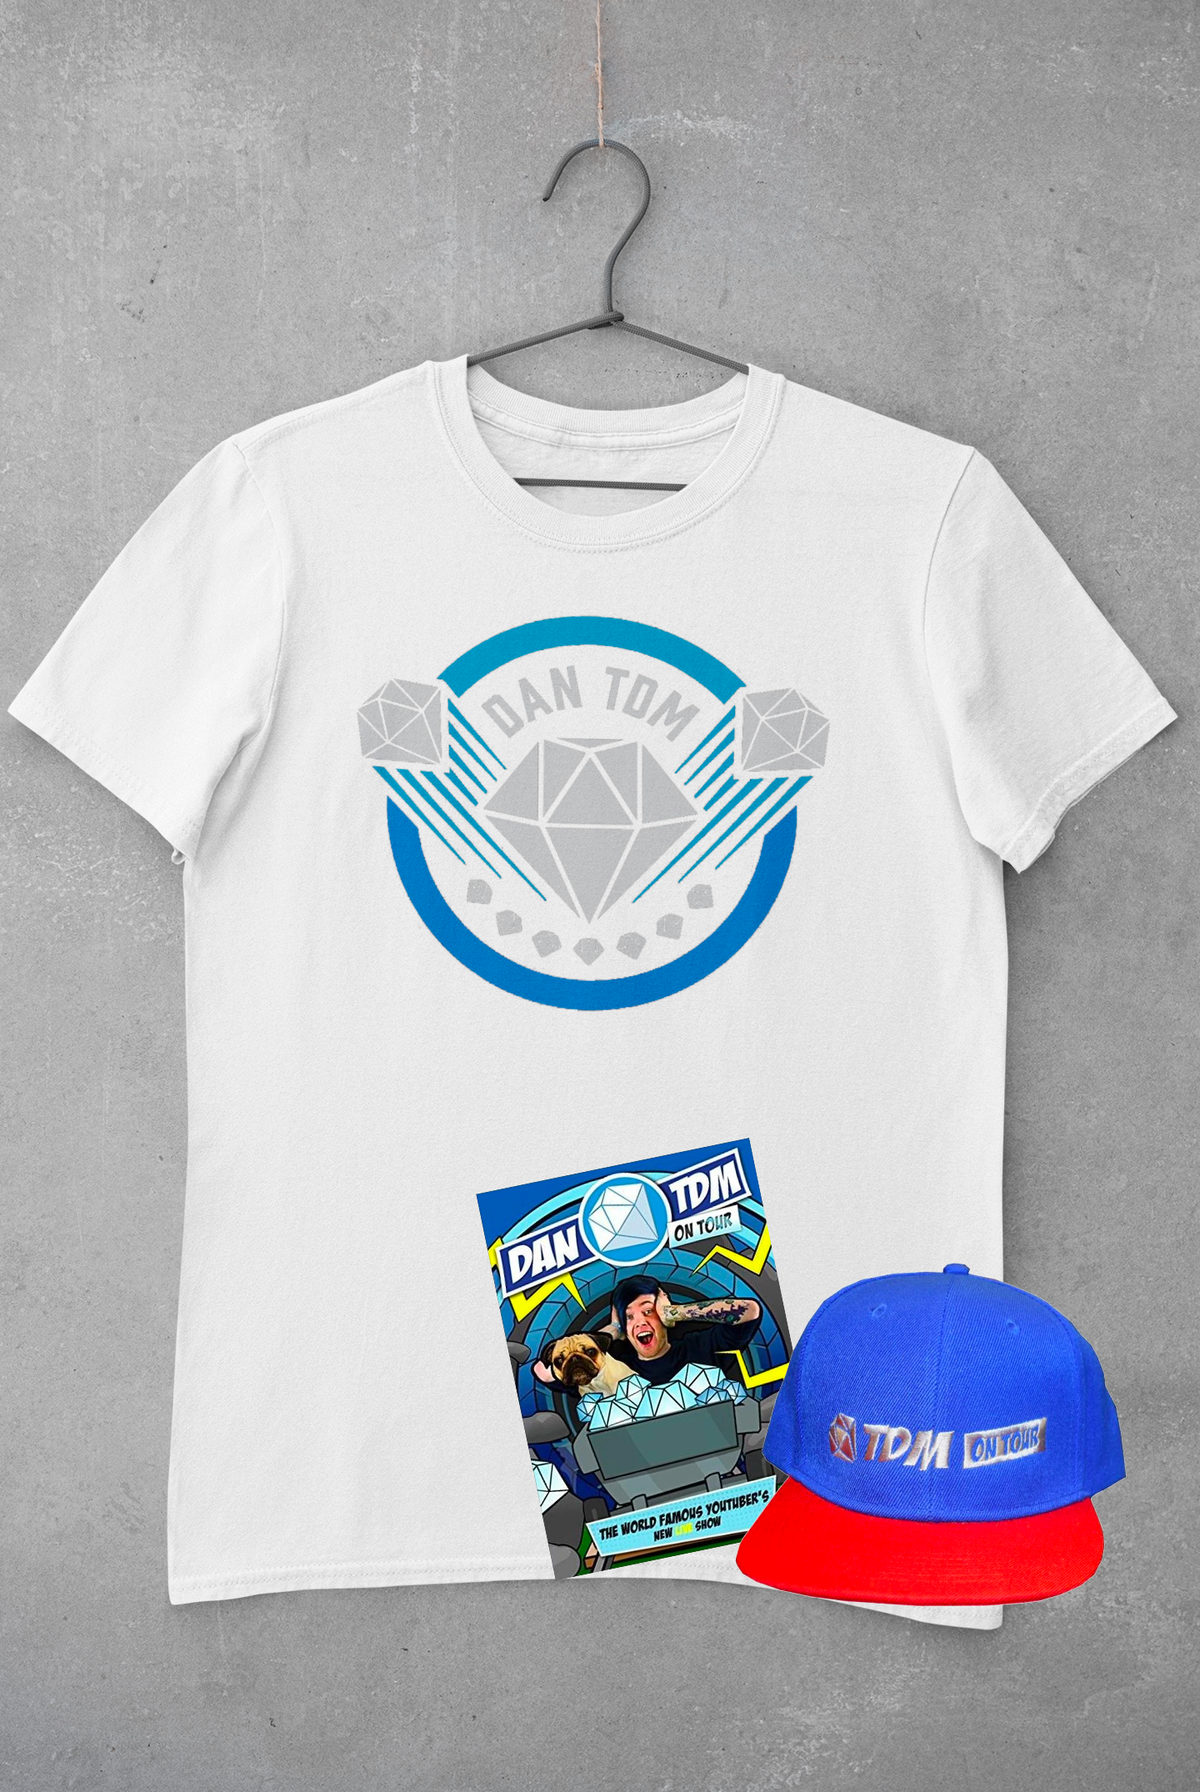 Dan TDM Diamonds Legacy Short Sleeve T-Shirt  PLUS Free Cap and DVD with Purchase